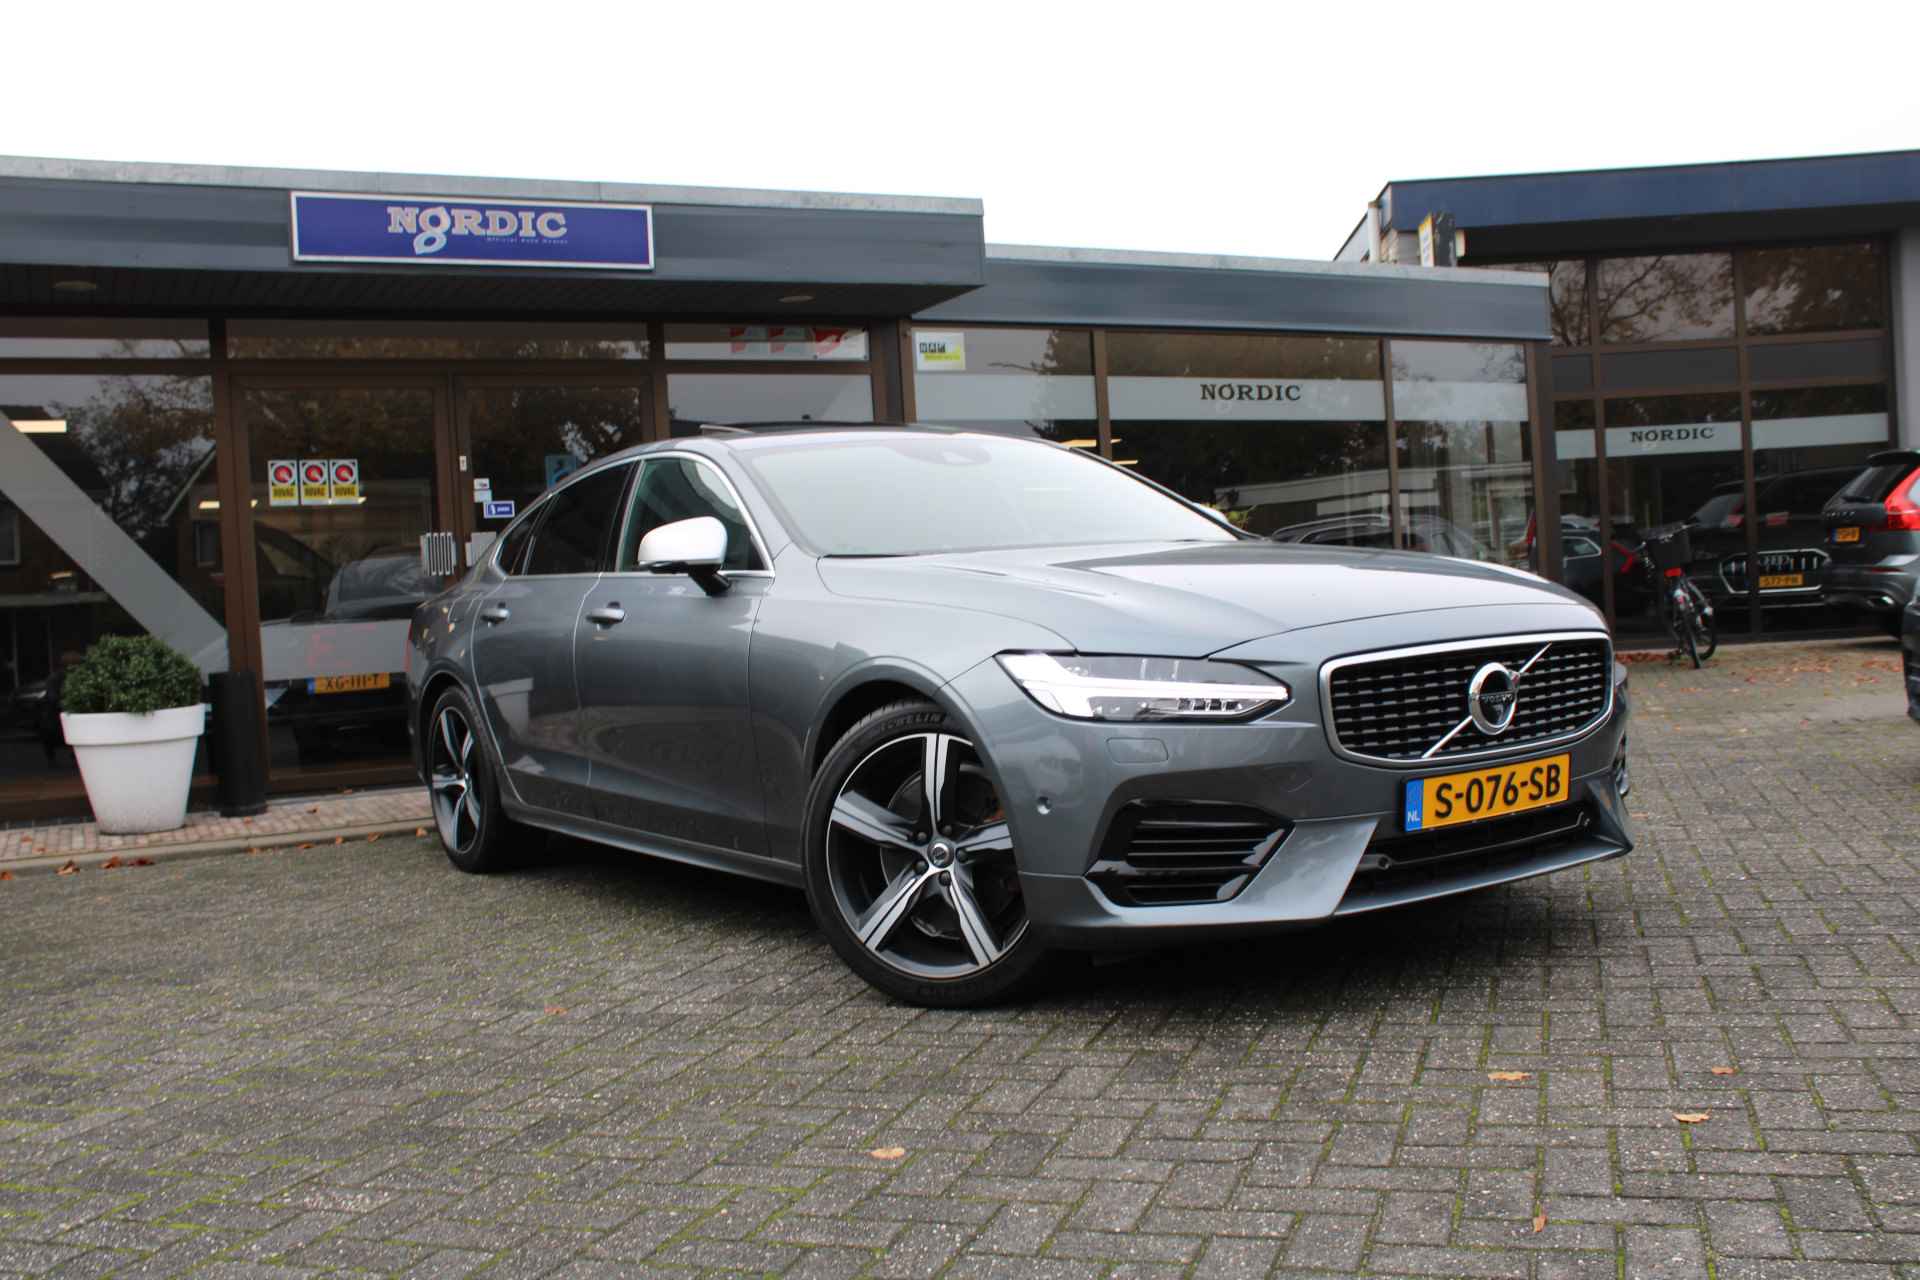 Volvo S90 2.0 T8 AWD R-DESIGN GEARTRONIC SCHUIFDAK 360 CAMERA- HEAD UP DISPLAY- BOWERS & WILKINS SOUND - 7/36